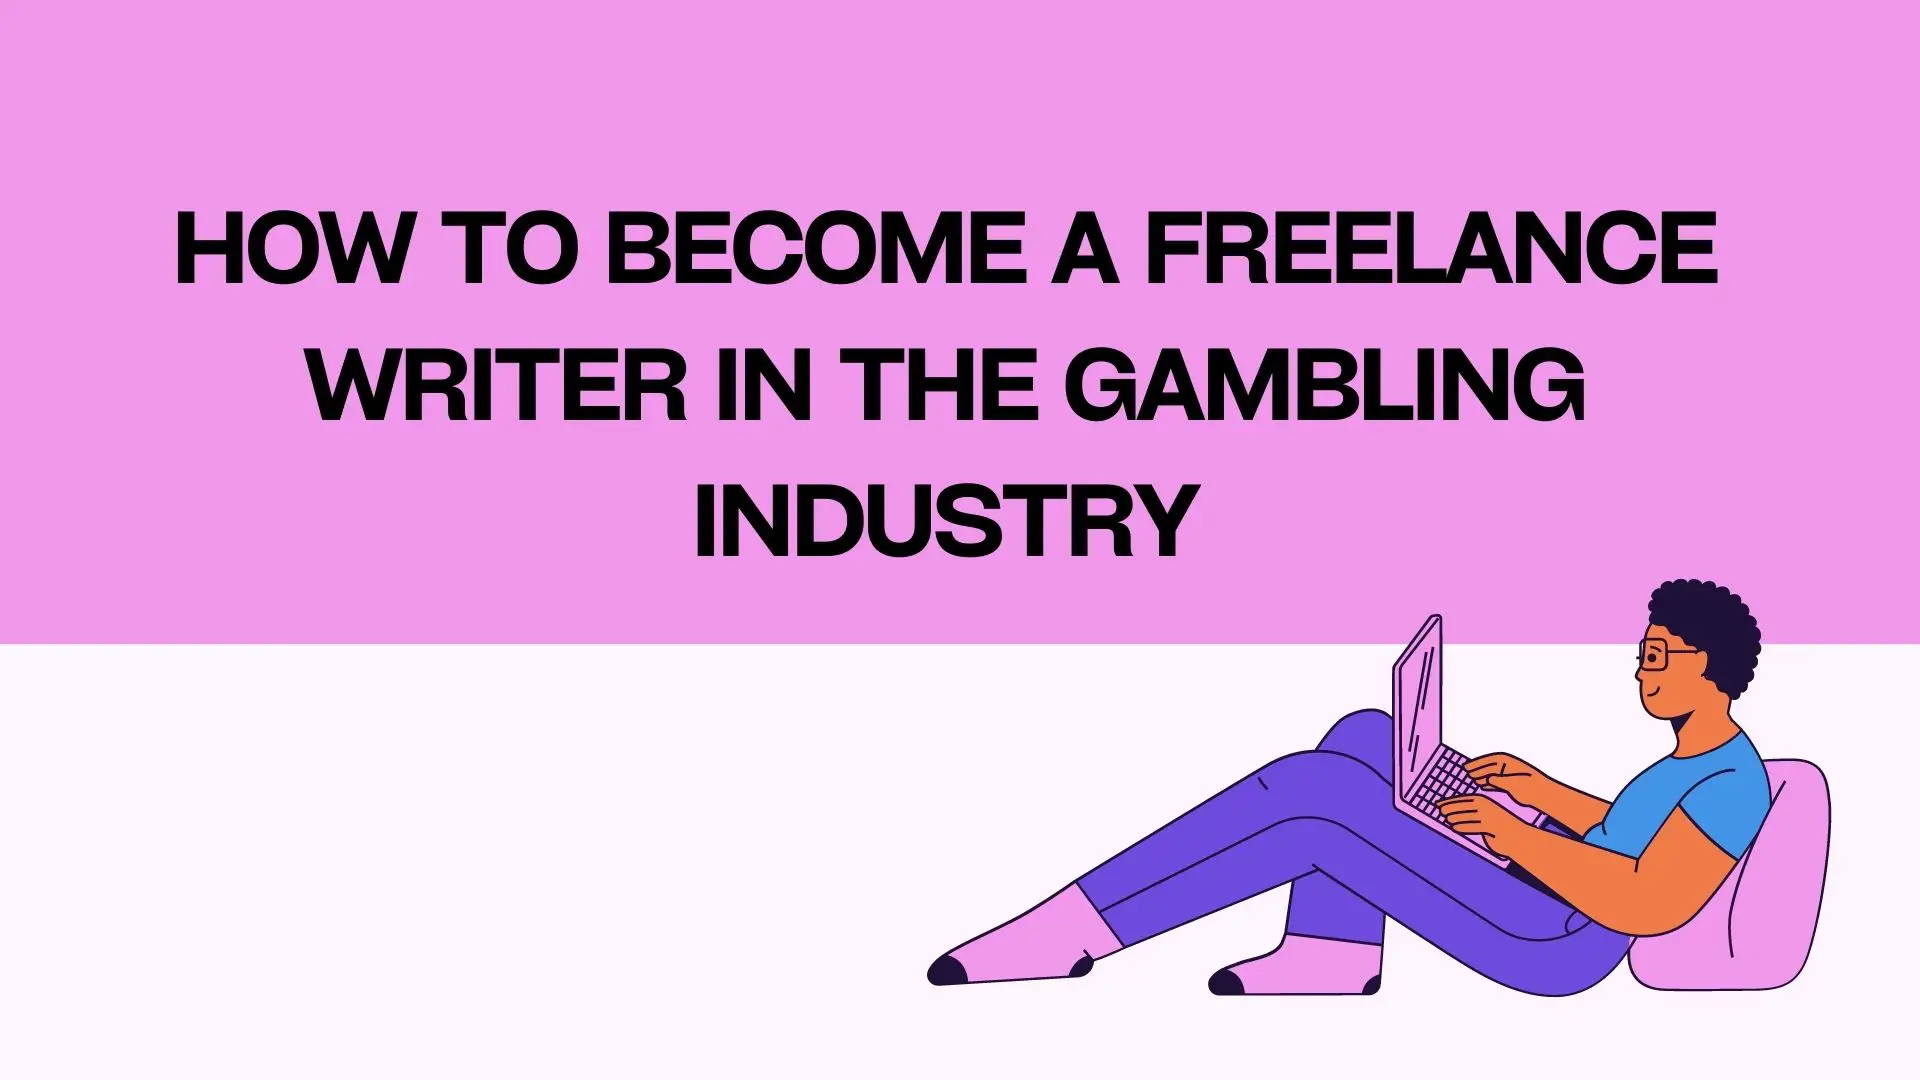 How To Become A Freelance Writer In The Gambling Industry